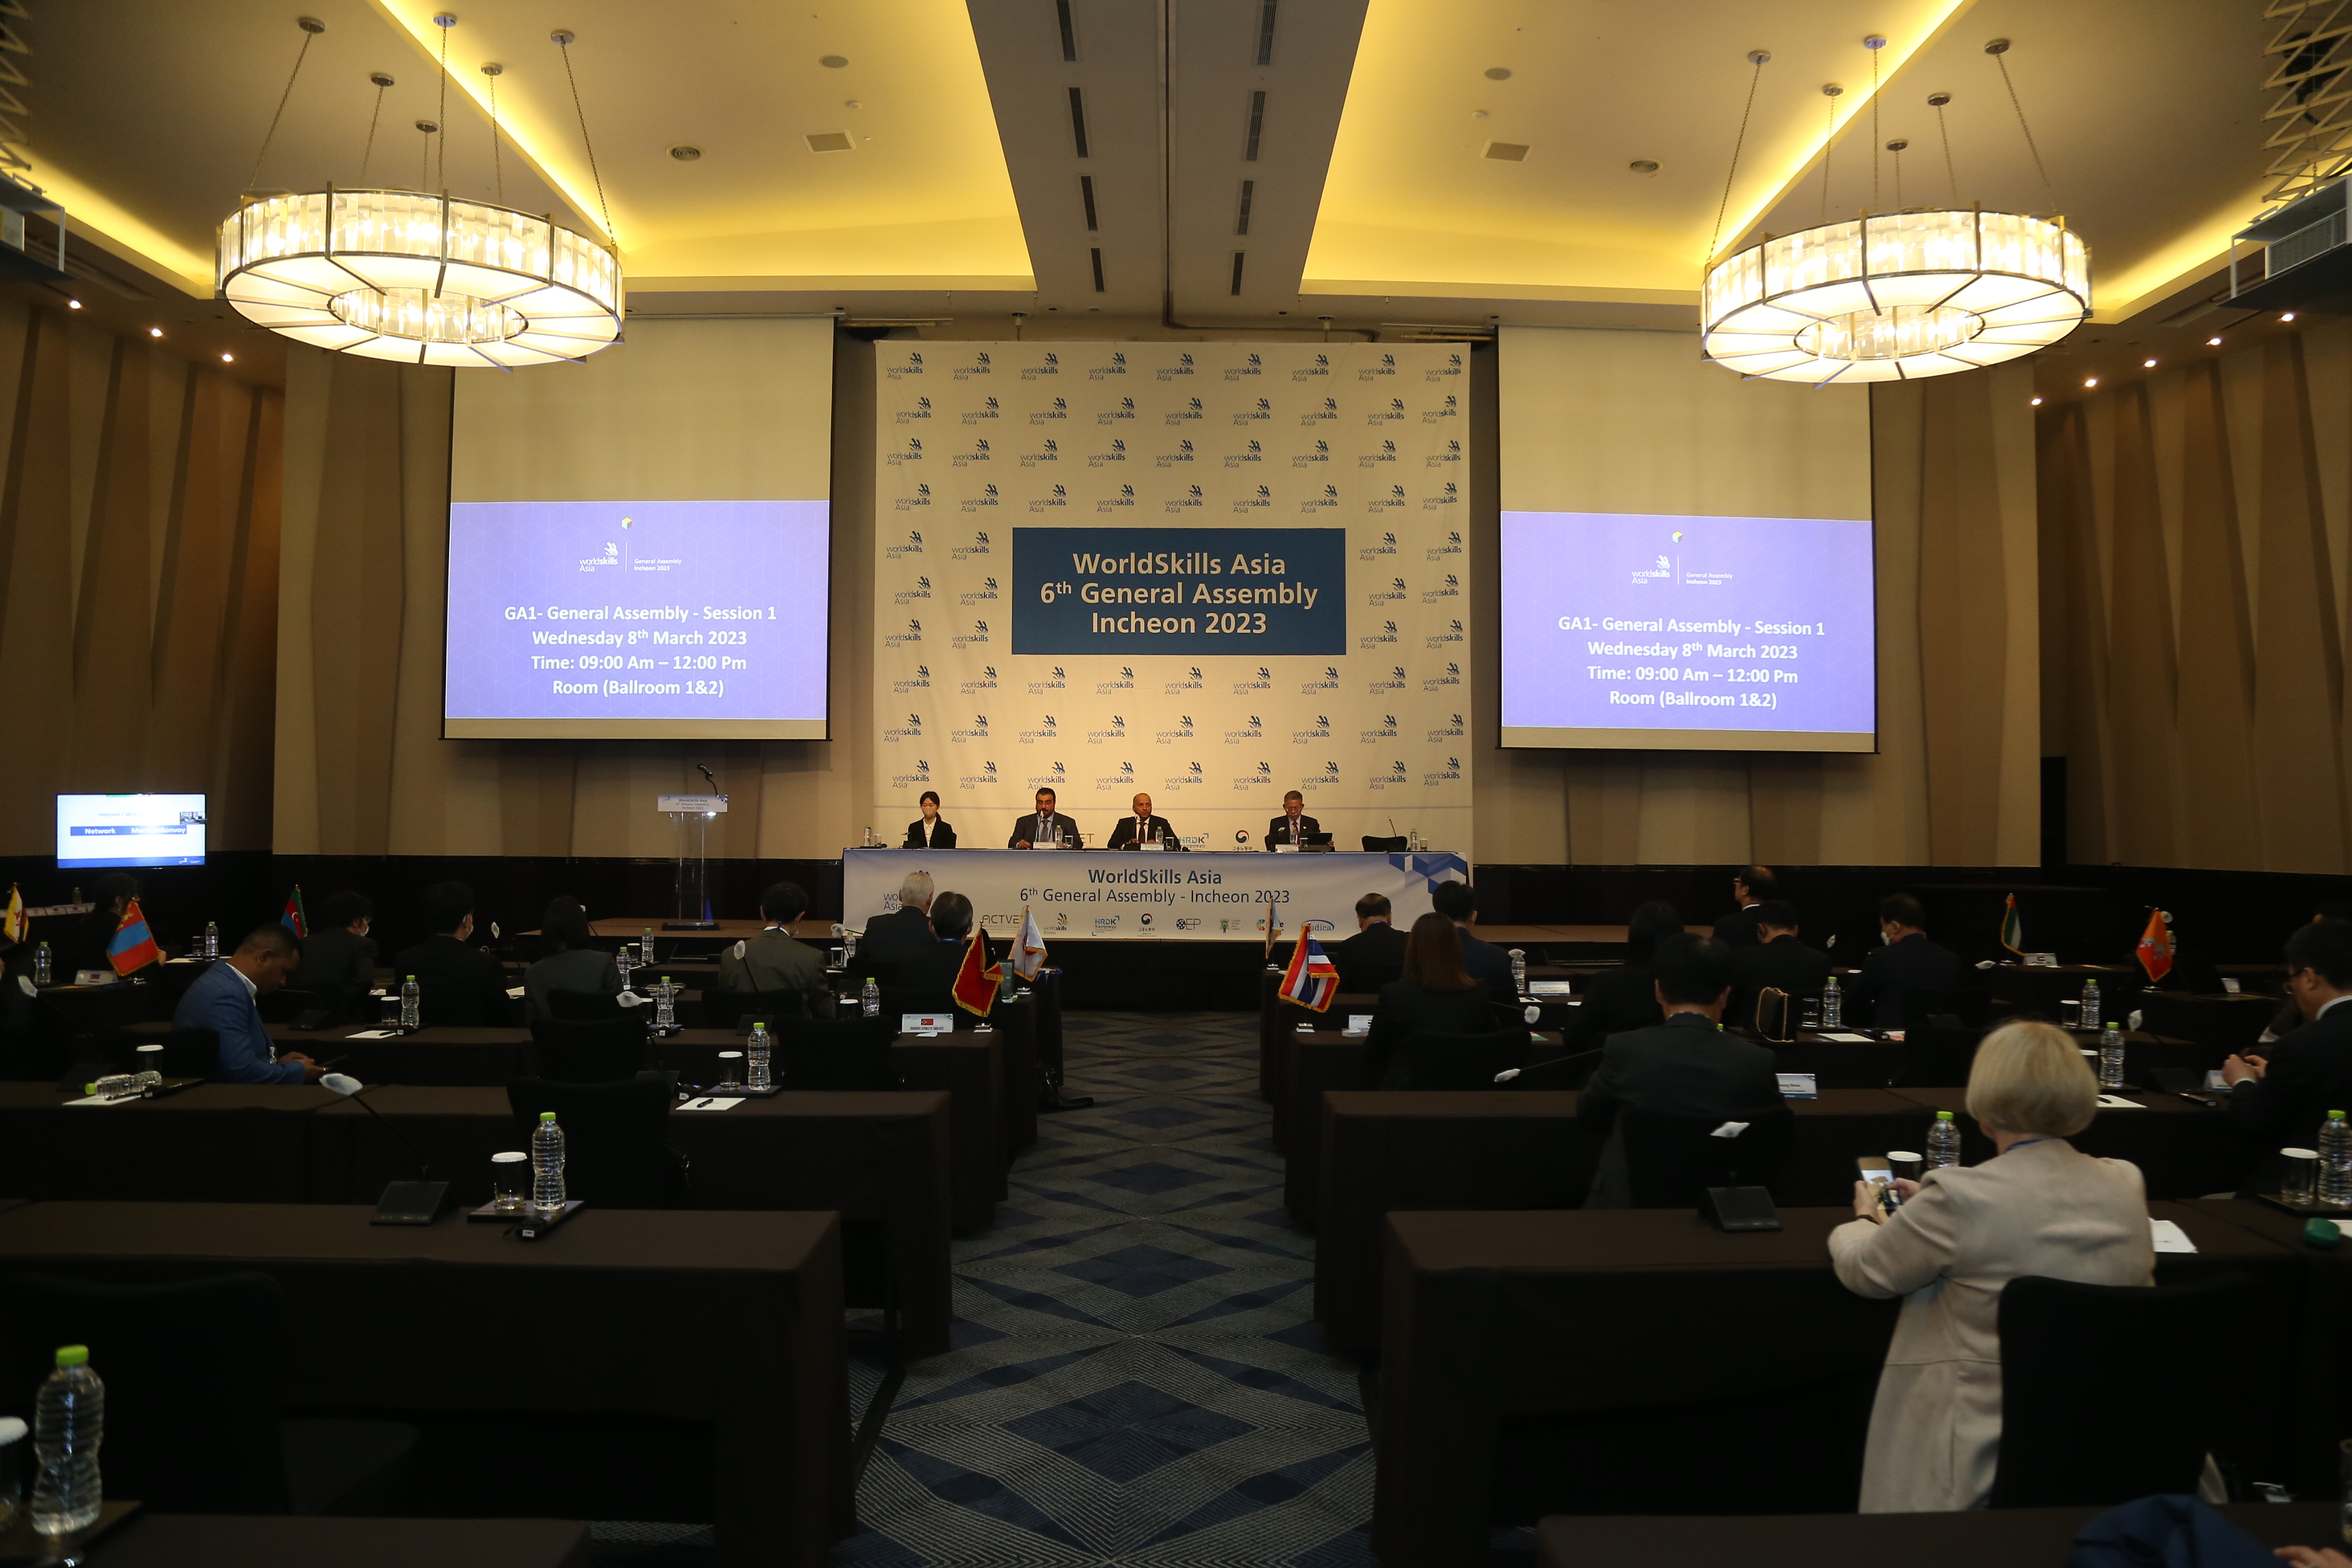 WorldSkills Asia 6th General Assembly Incheon 2023